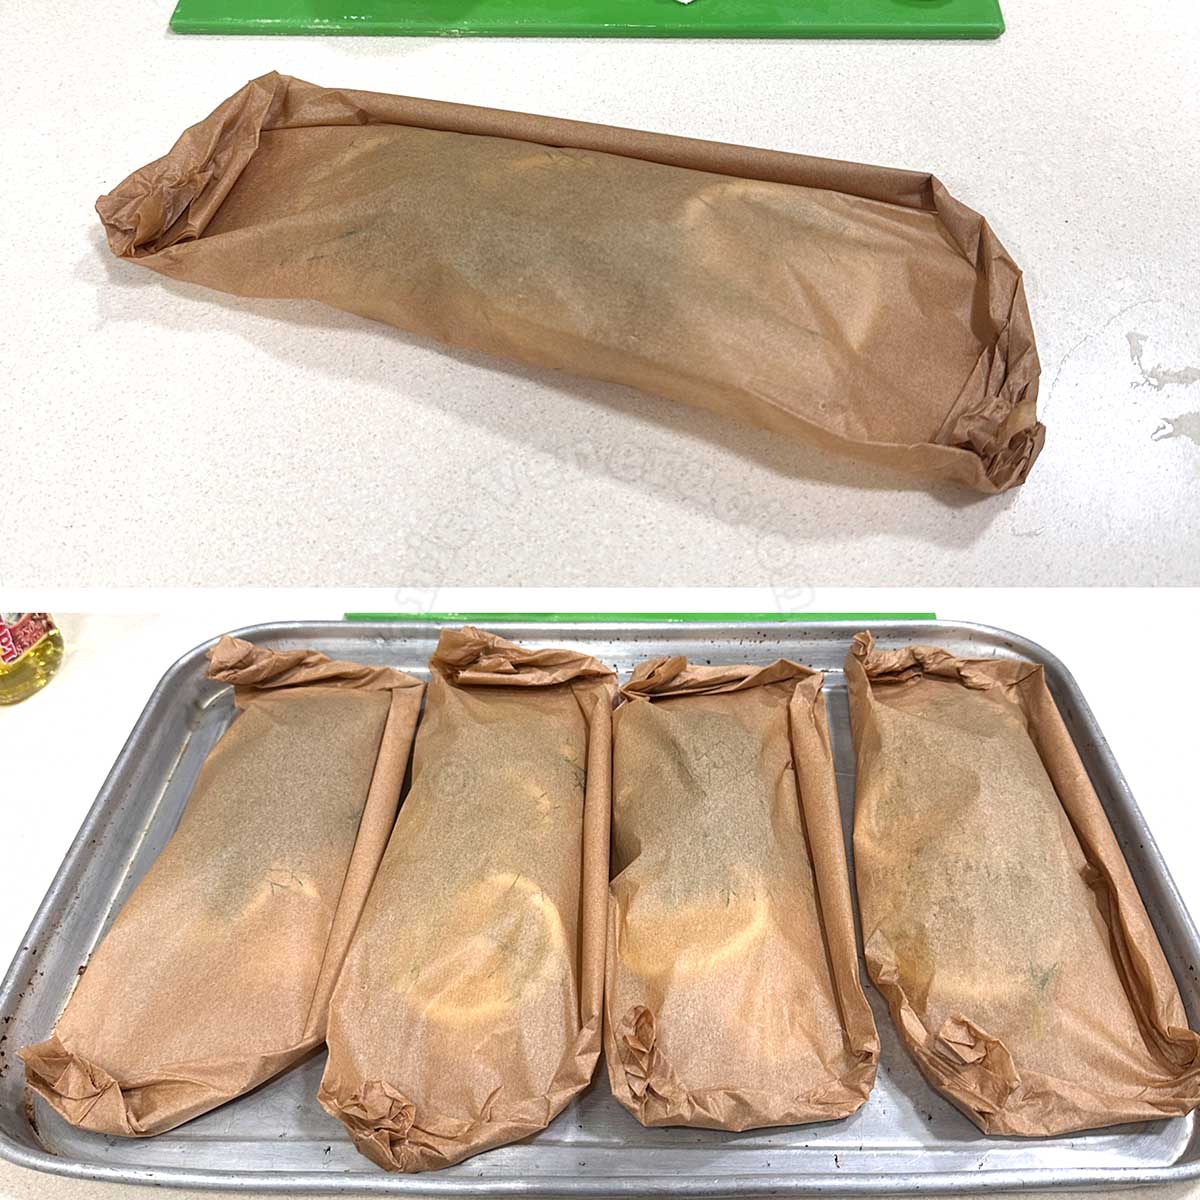 Fish wrapped in parchment paper